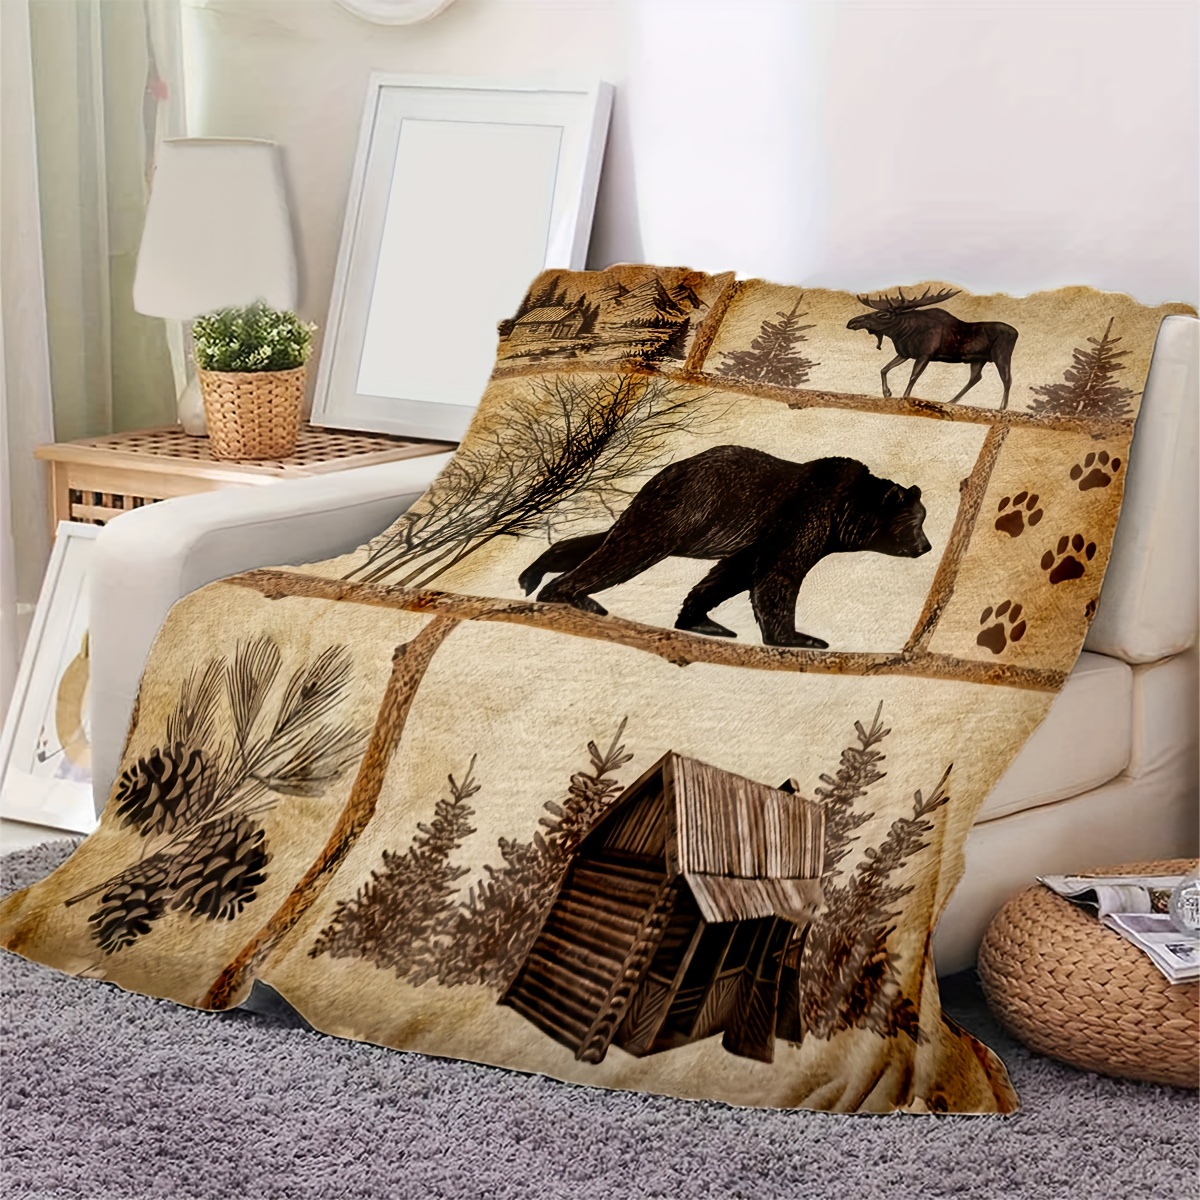 Afghans - Rustic Throws & Accent Pillows - Cabin Decor - camping